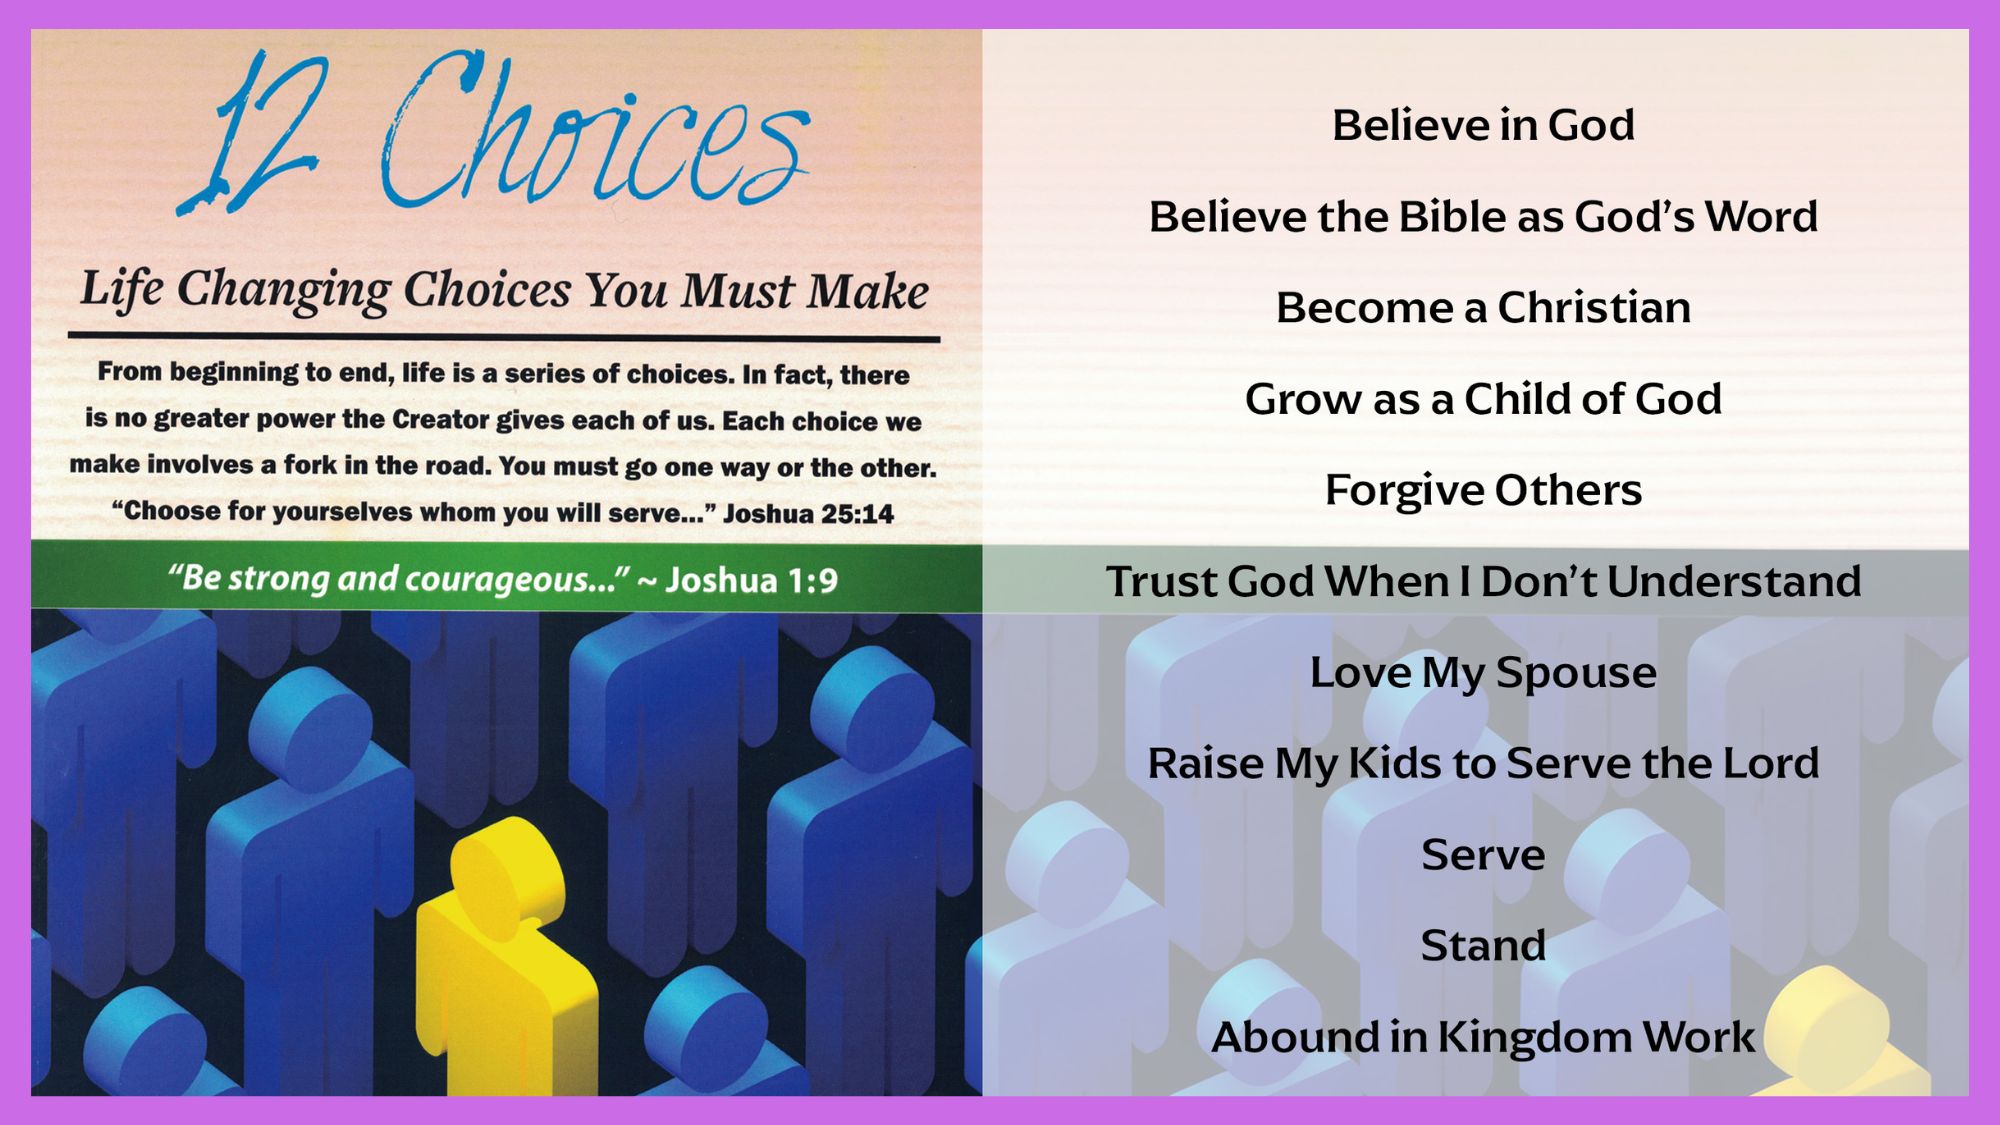 12 Choices - Life Changing Choices You Must Make: Choice # 3 Become a Christian